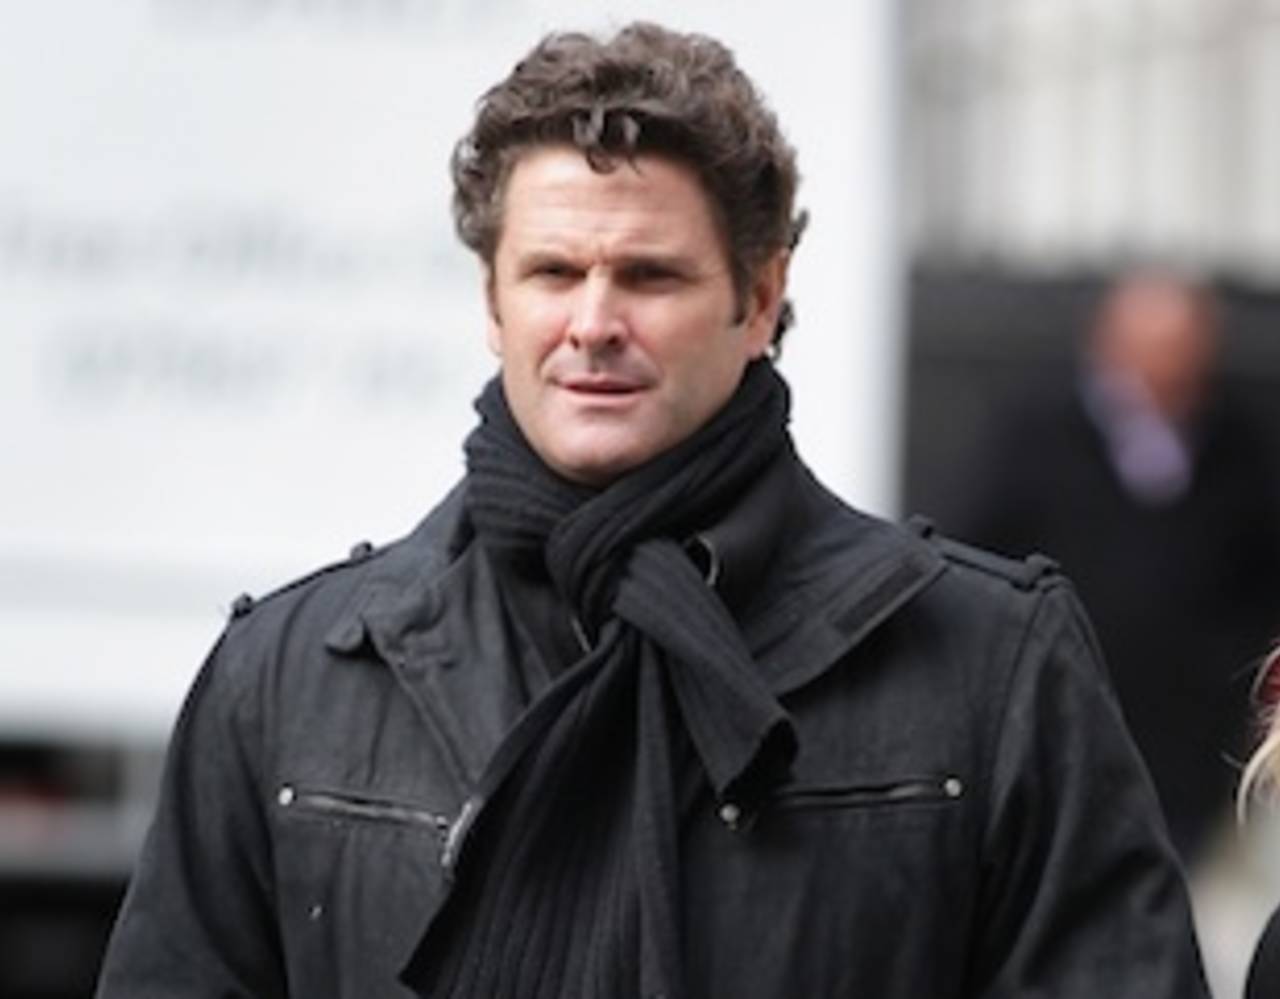 Chris Cairns arrives at the high court, London, March 5, 2012